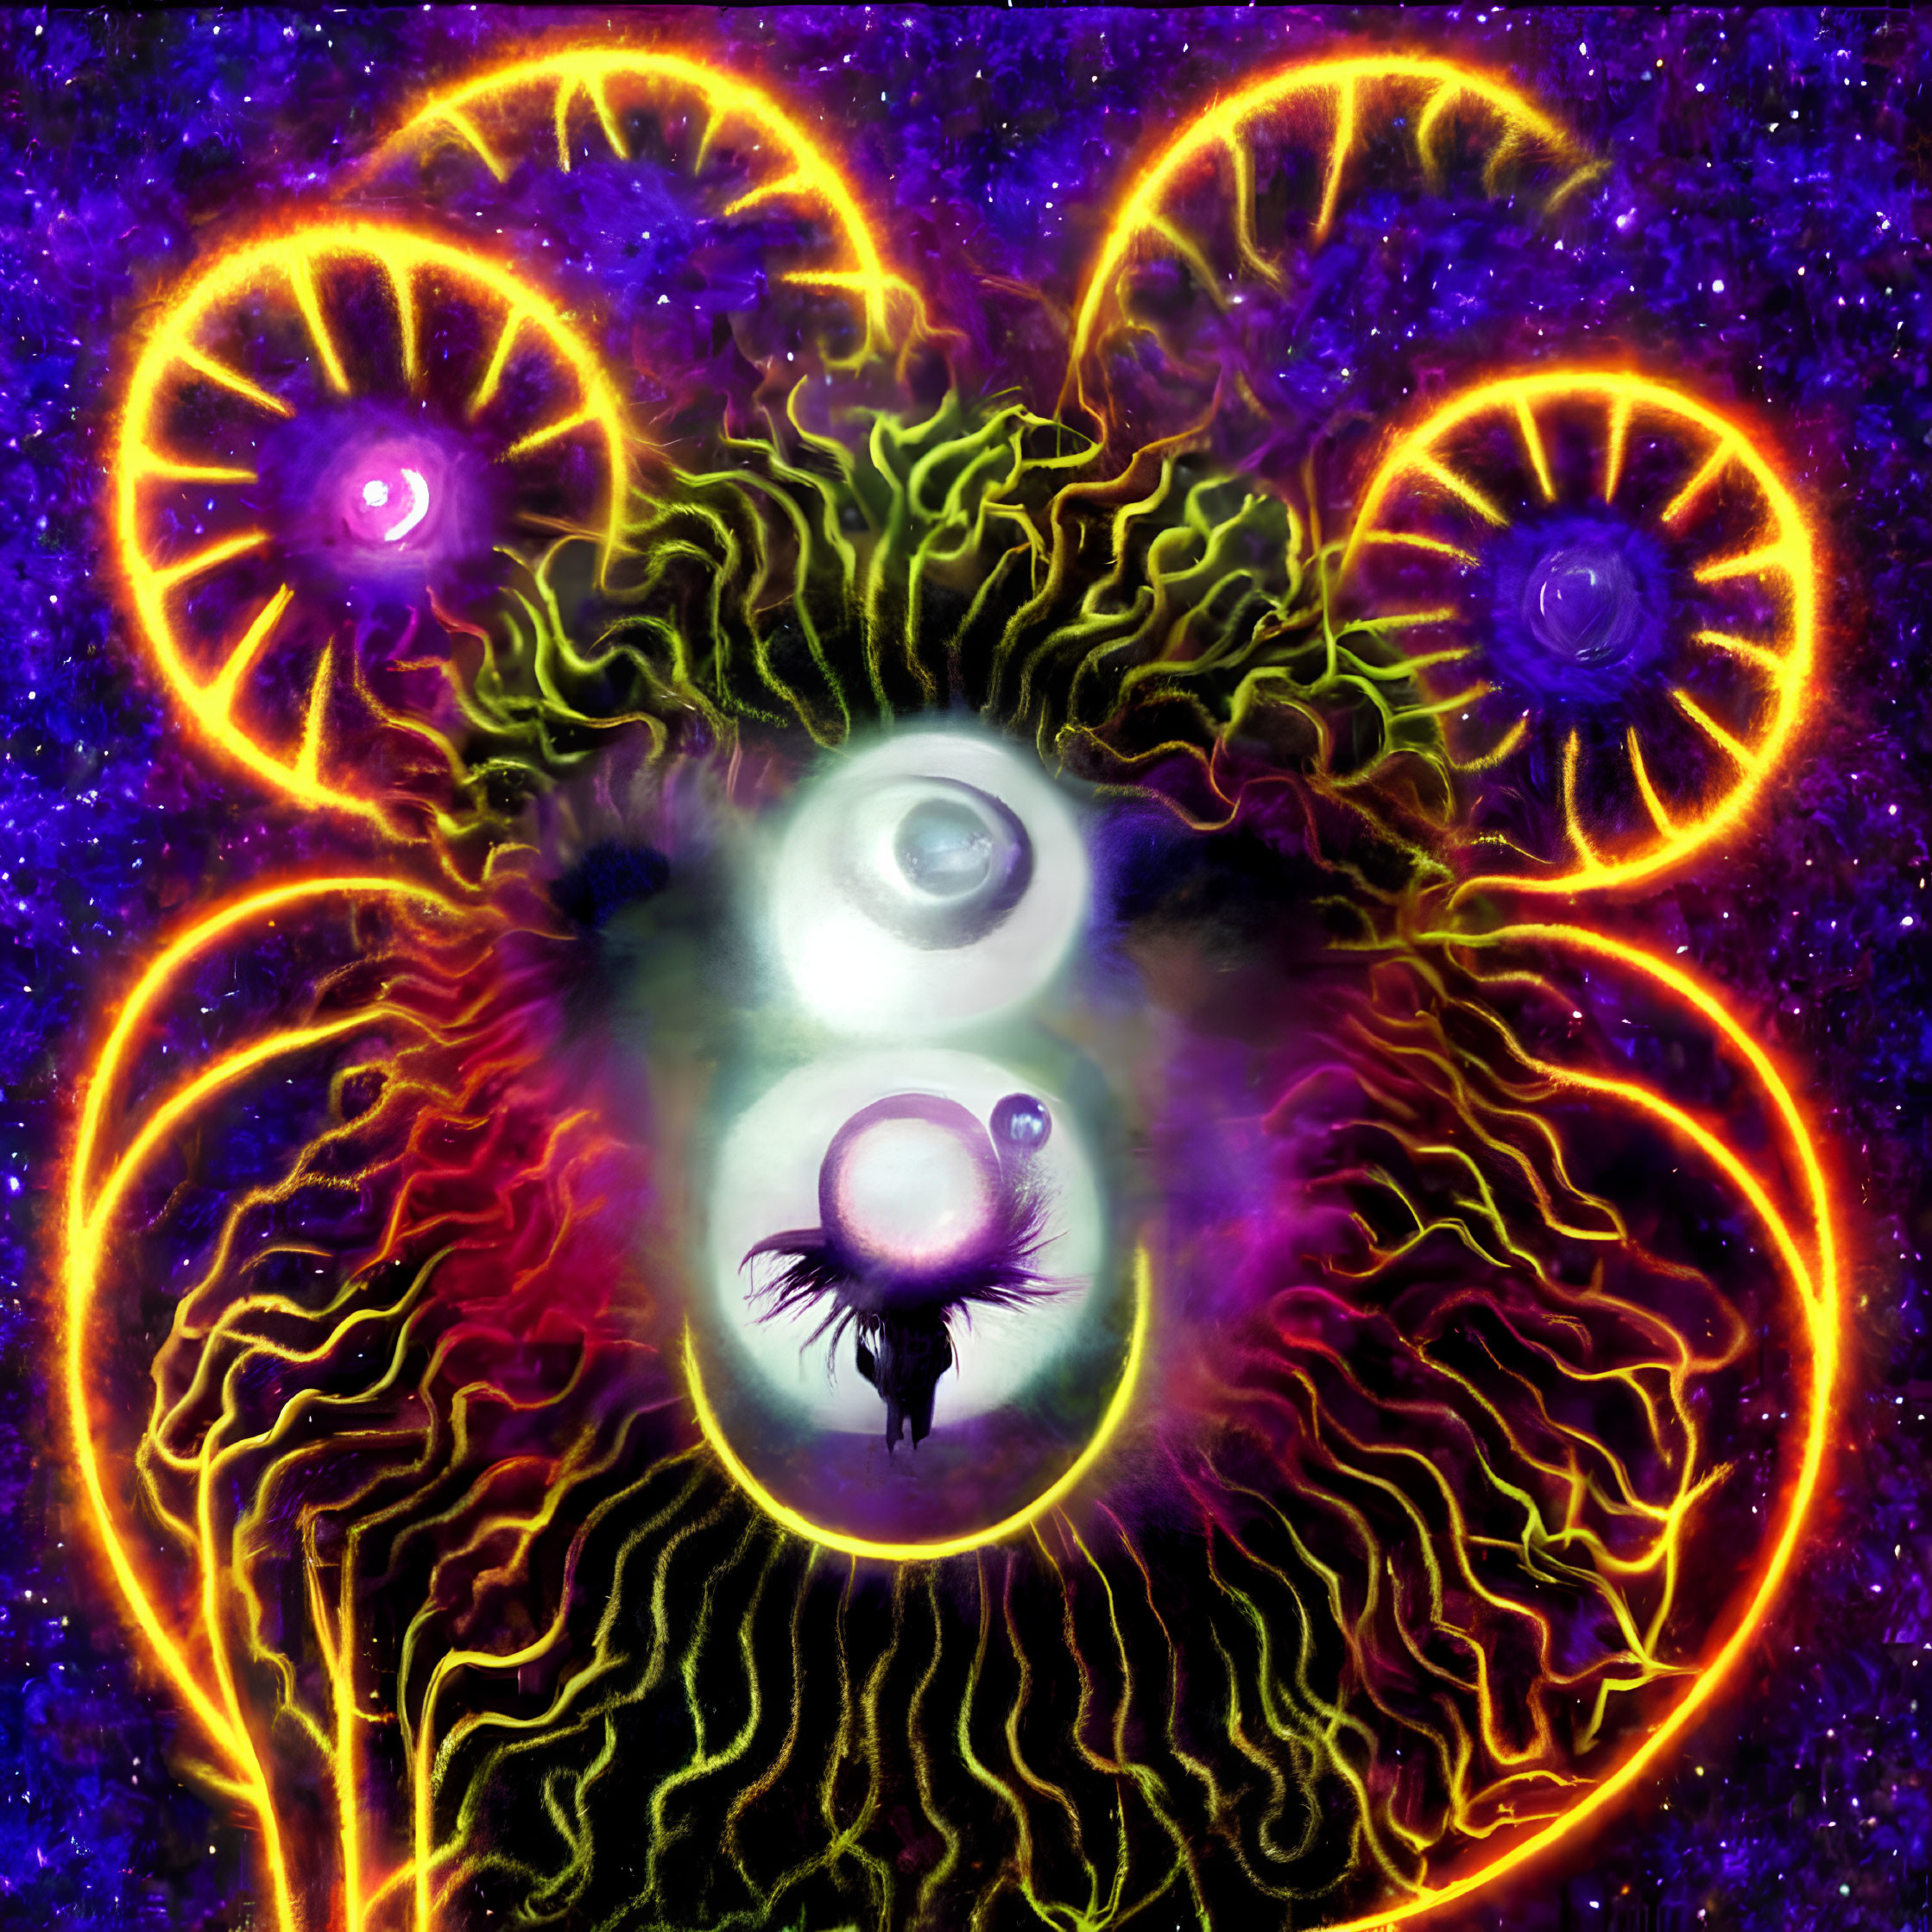 Cosmic entity with three eyes and tentacles in starry purple space